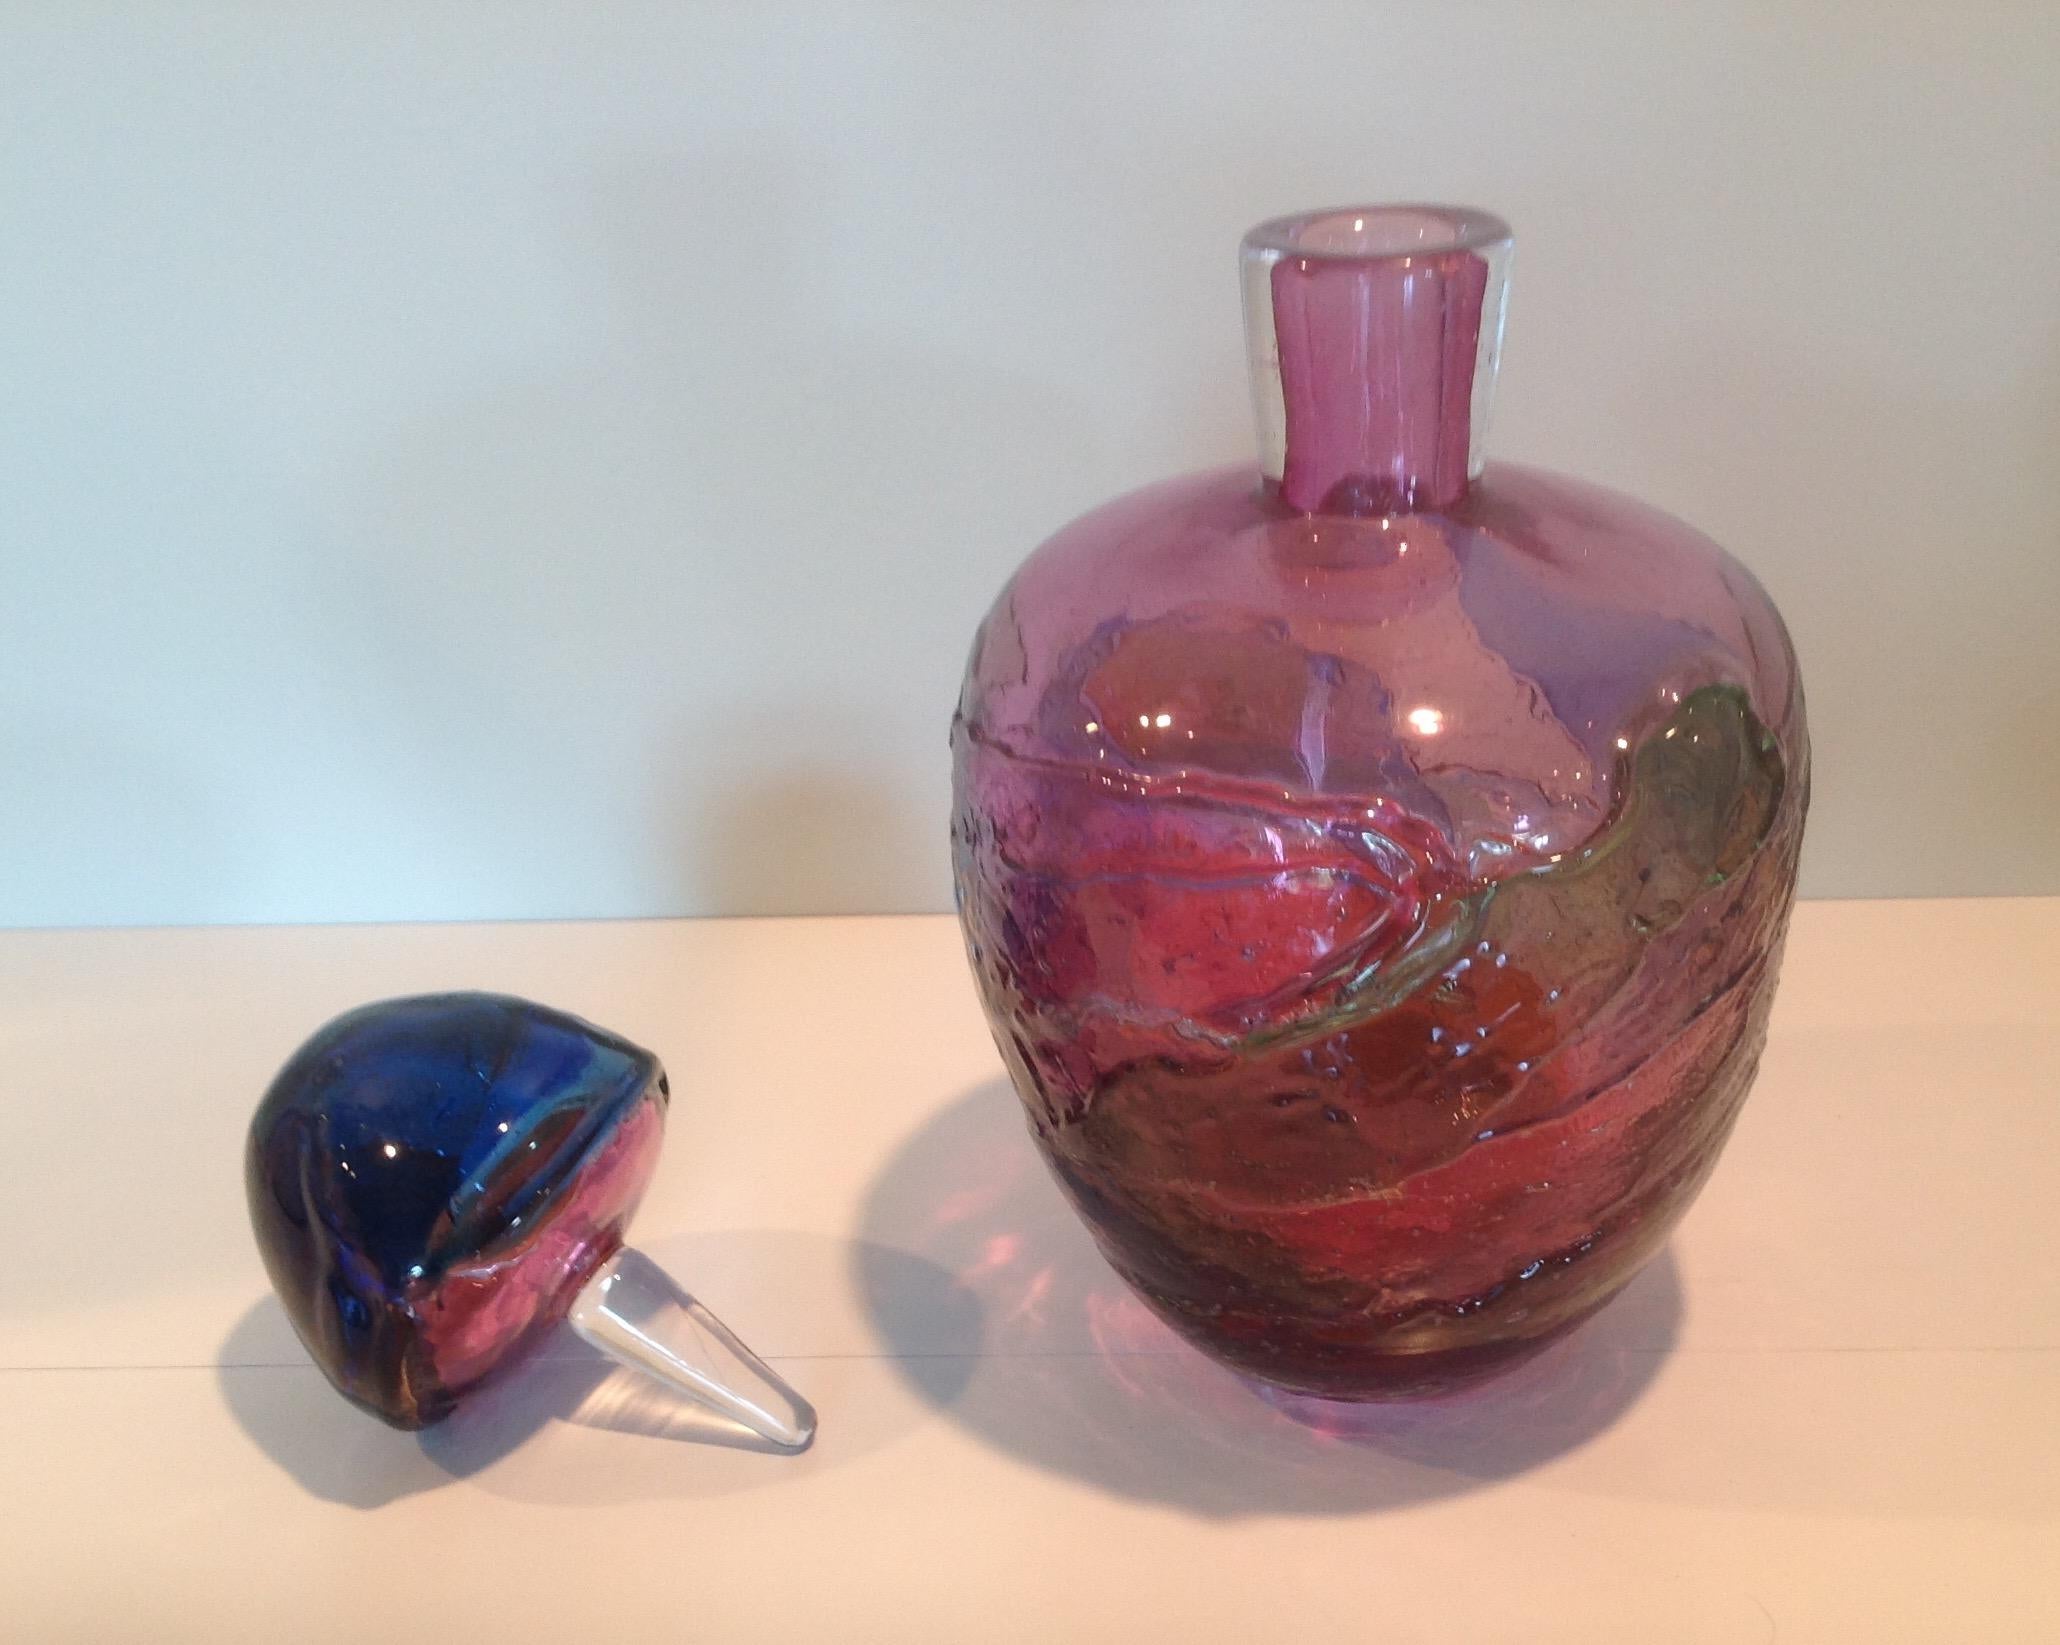 Italian Pino Signoretto Amazing and Large Murano Decanter Signed by the Artist